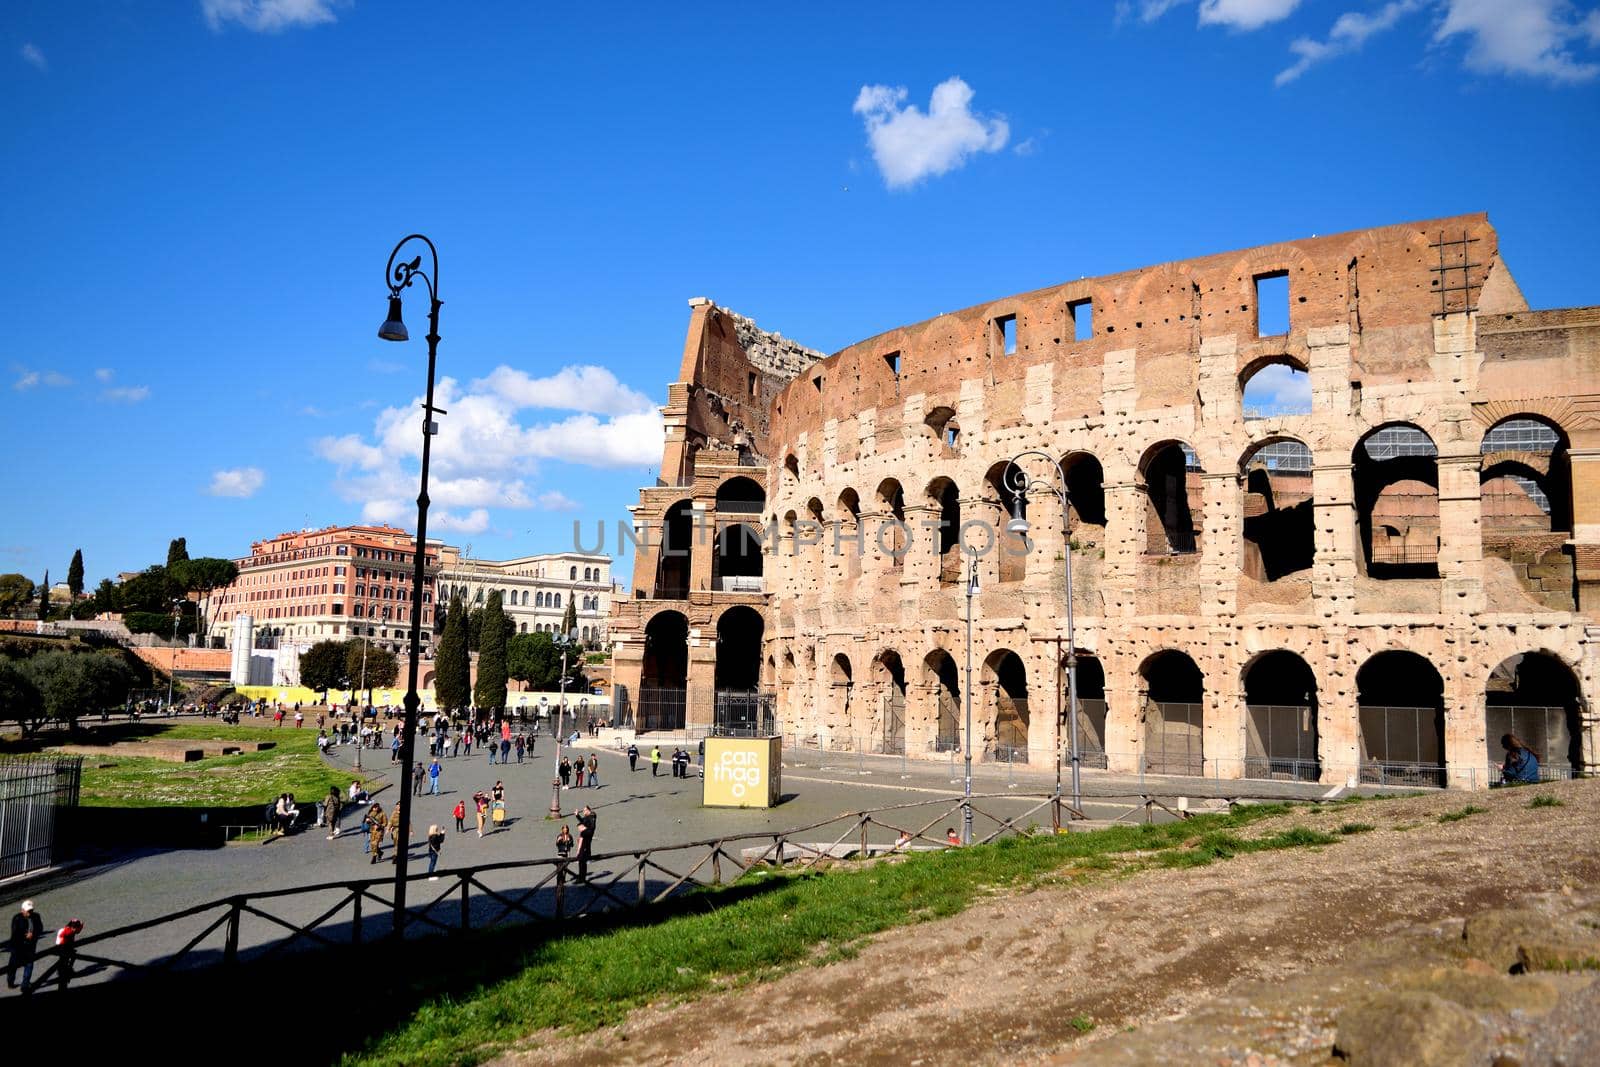 March 8th 2020, Rome, Italy: View of the Colosseum with few tourists due to the coronavirus by silentstock639